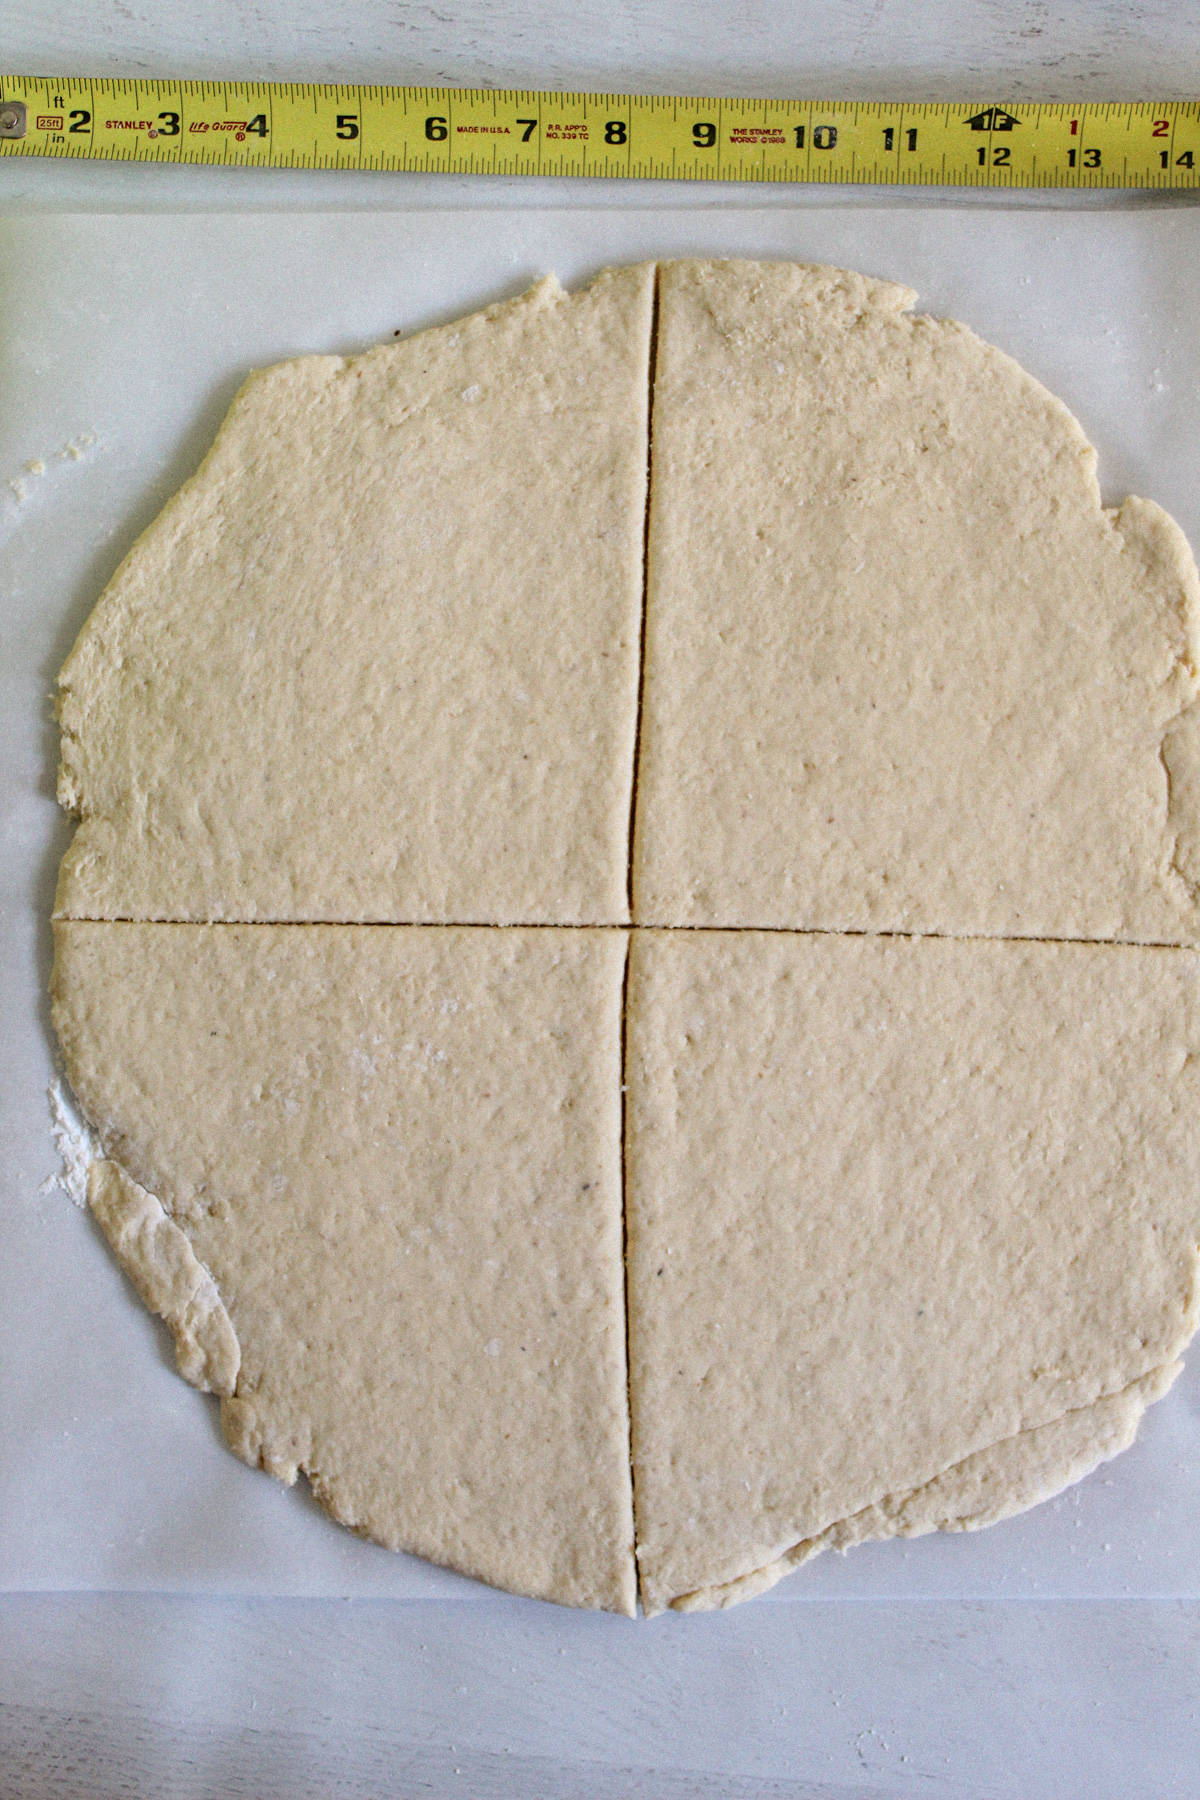 dough cut into 4 equal sections